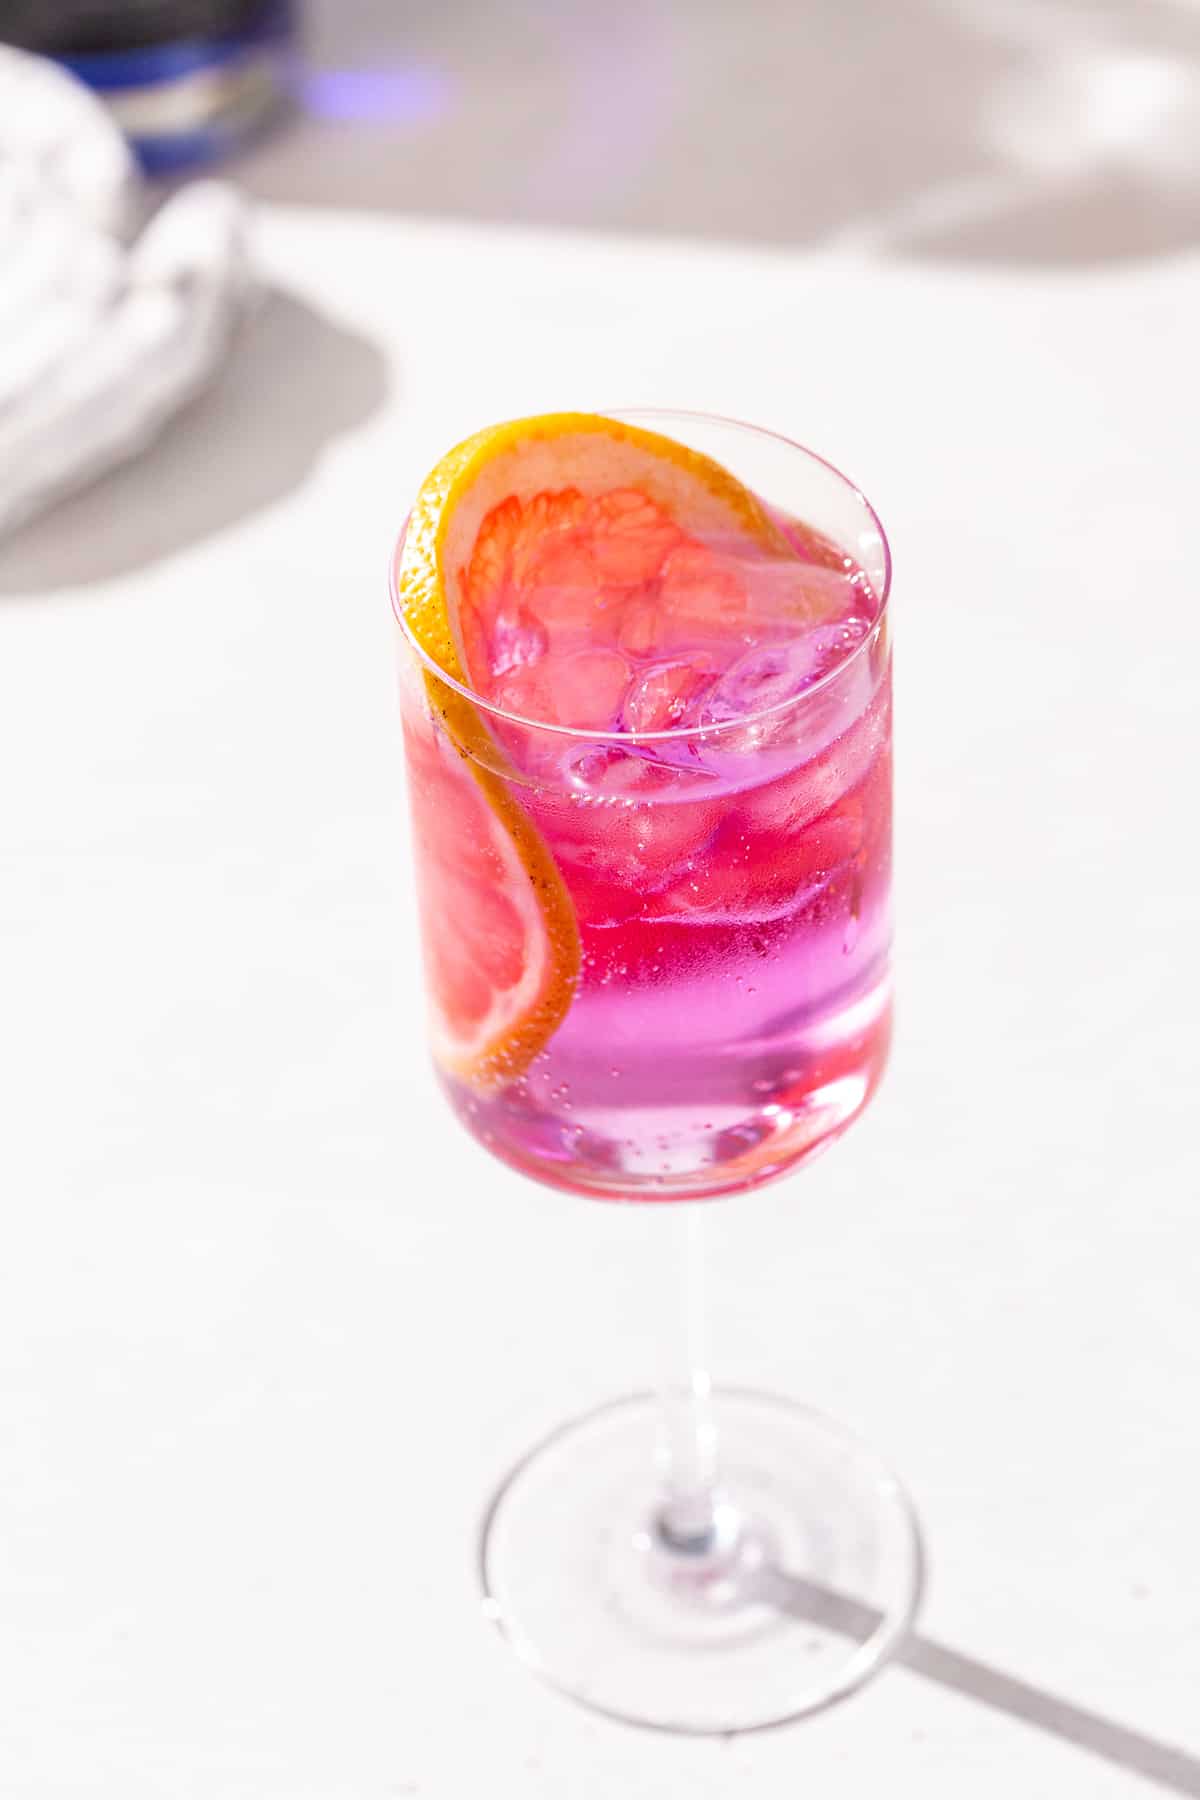 Overhead view of Empress Gin and Tonic cocktail in a wine glass. The drink is garnished with a pink grapefruit slice.